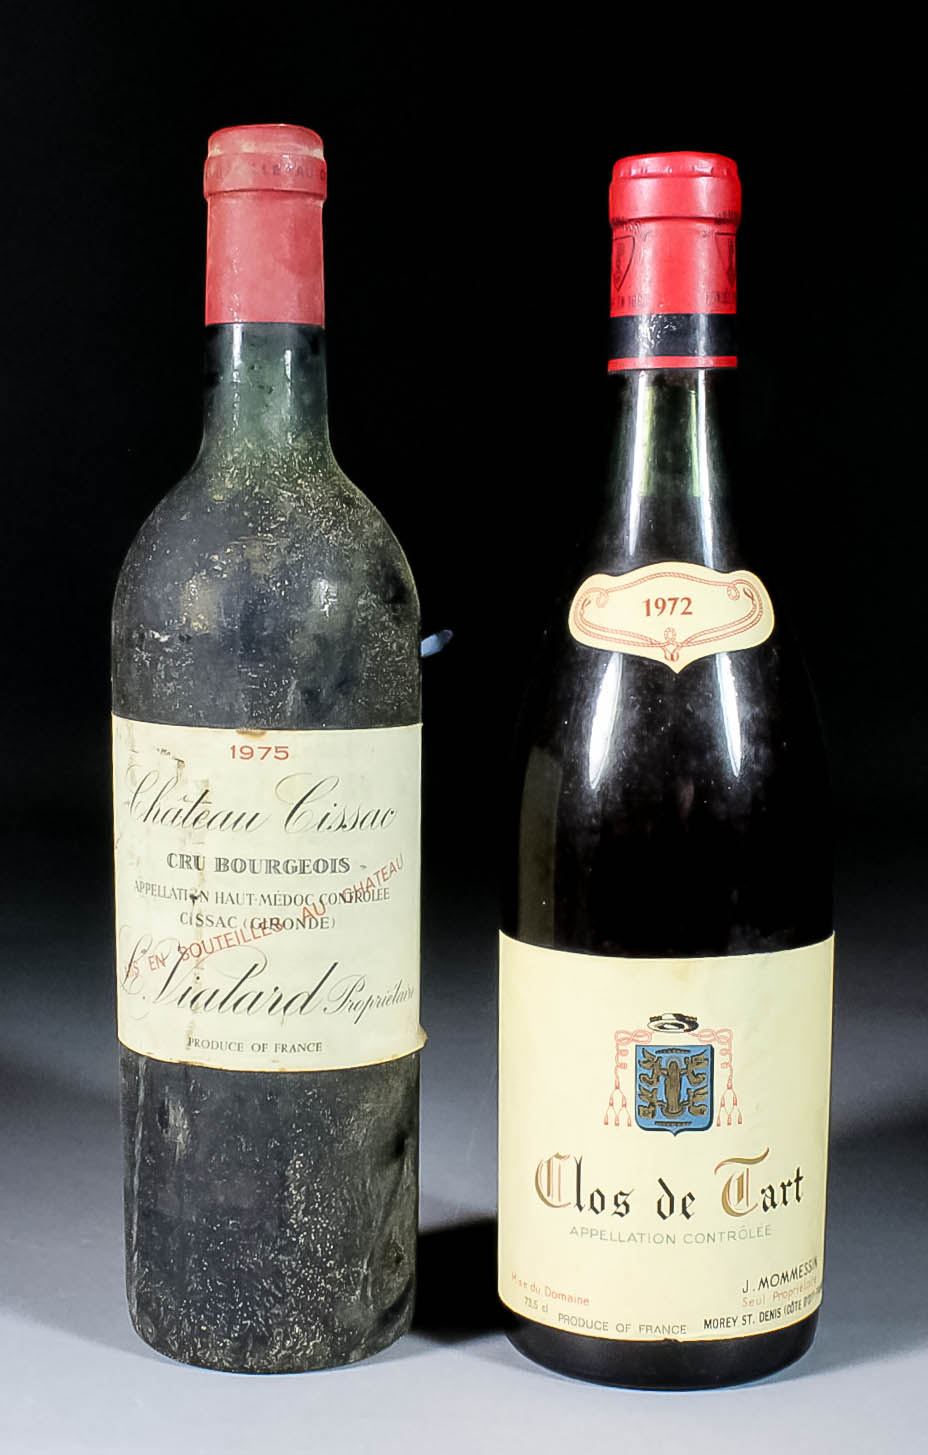 One bottle of 1972 Clos de Tart (Burgundy), produced by J. Mommessin, in presentation box, and a